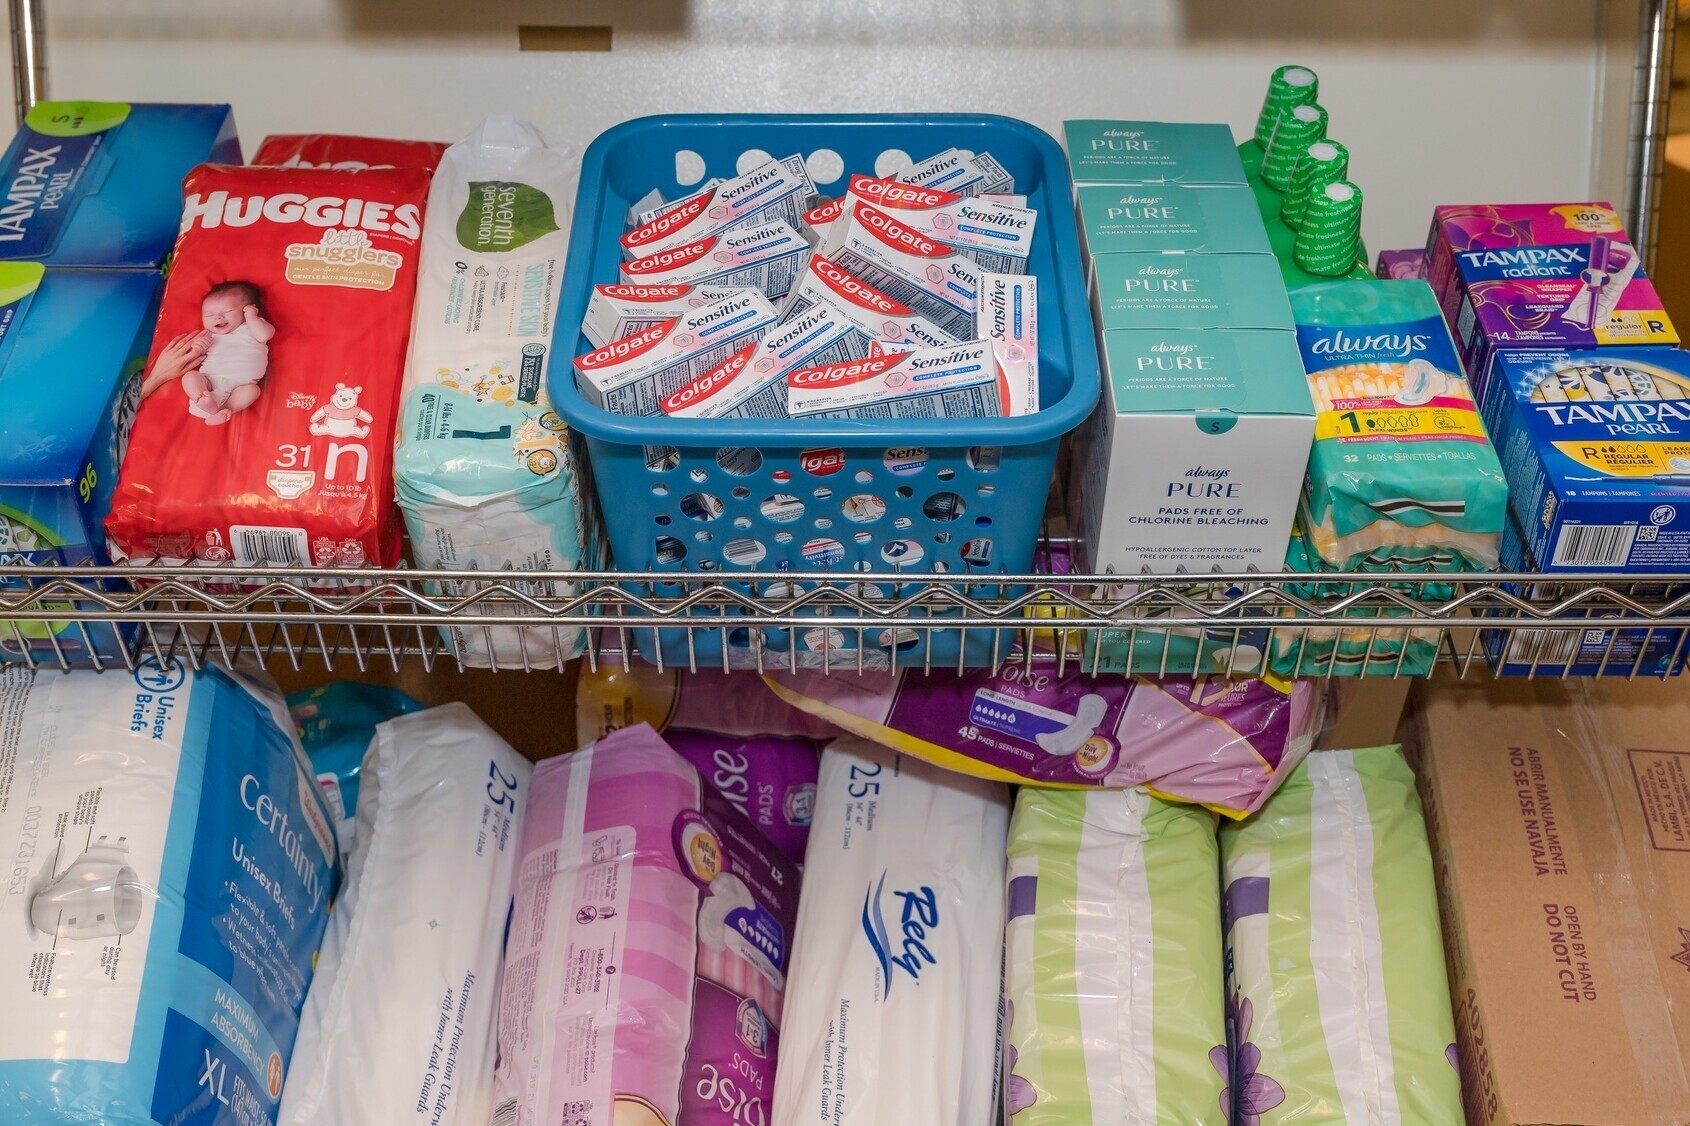 Shelf displaying hygienic items, diapers, and toothpaste